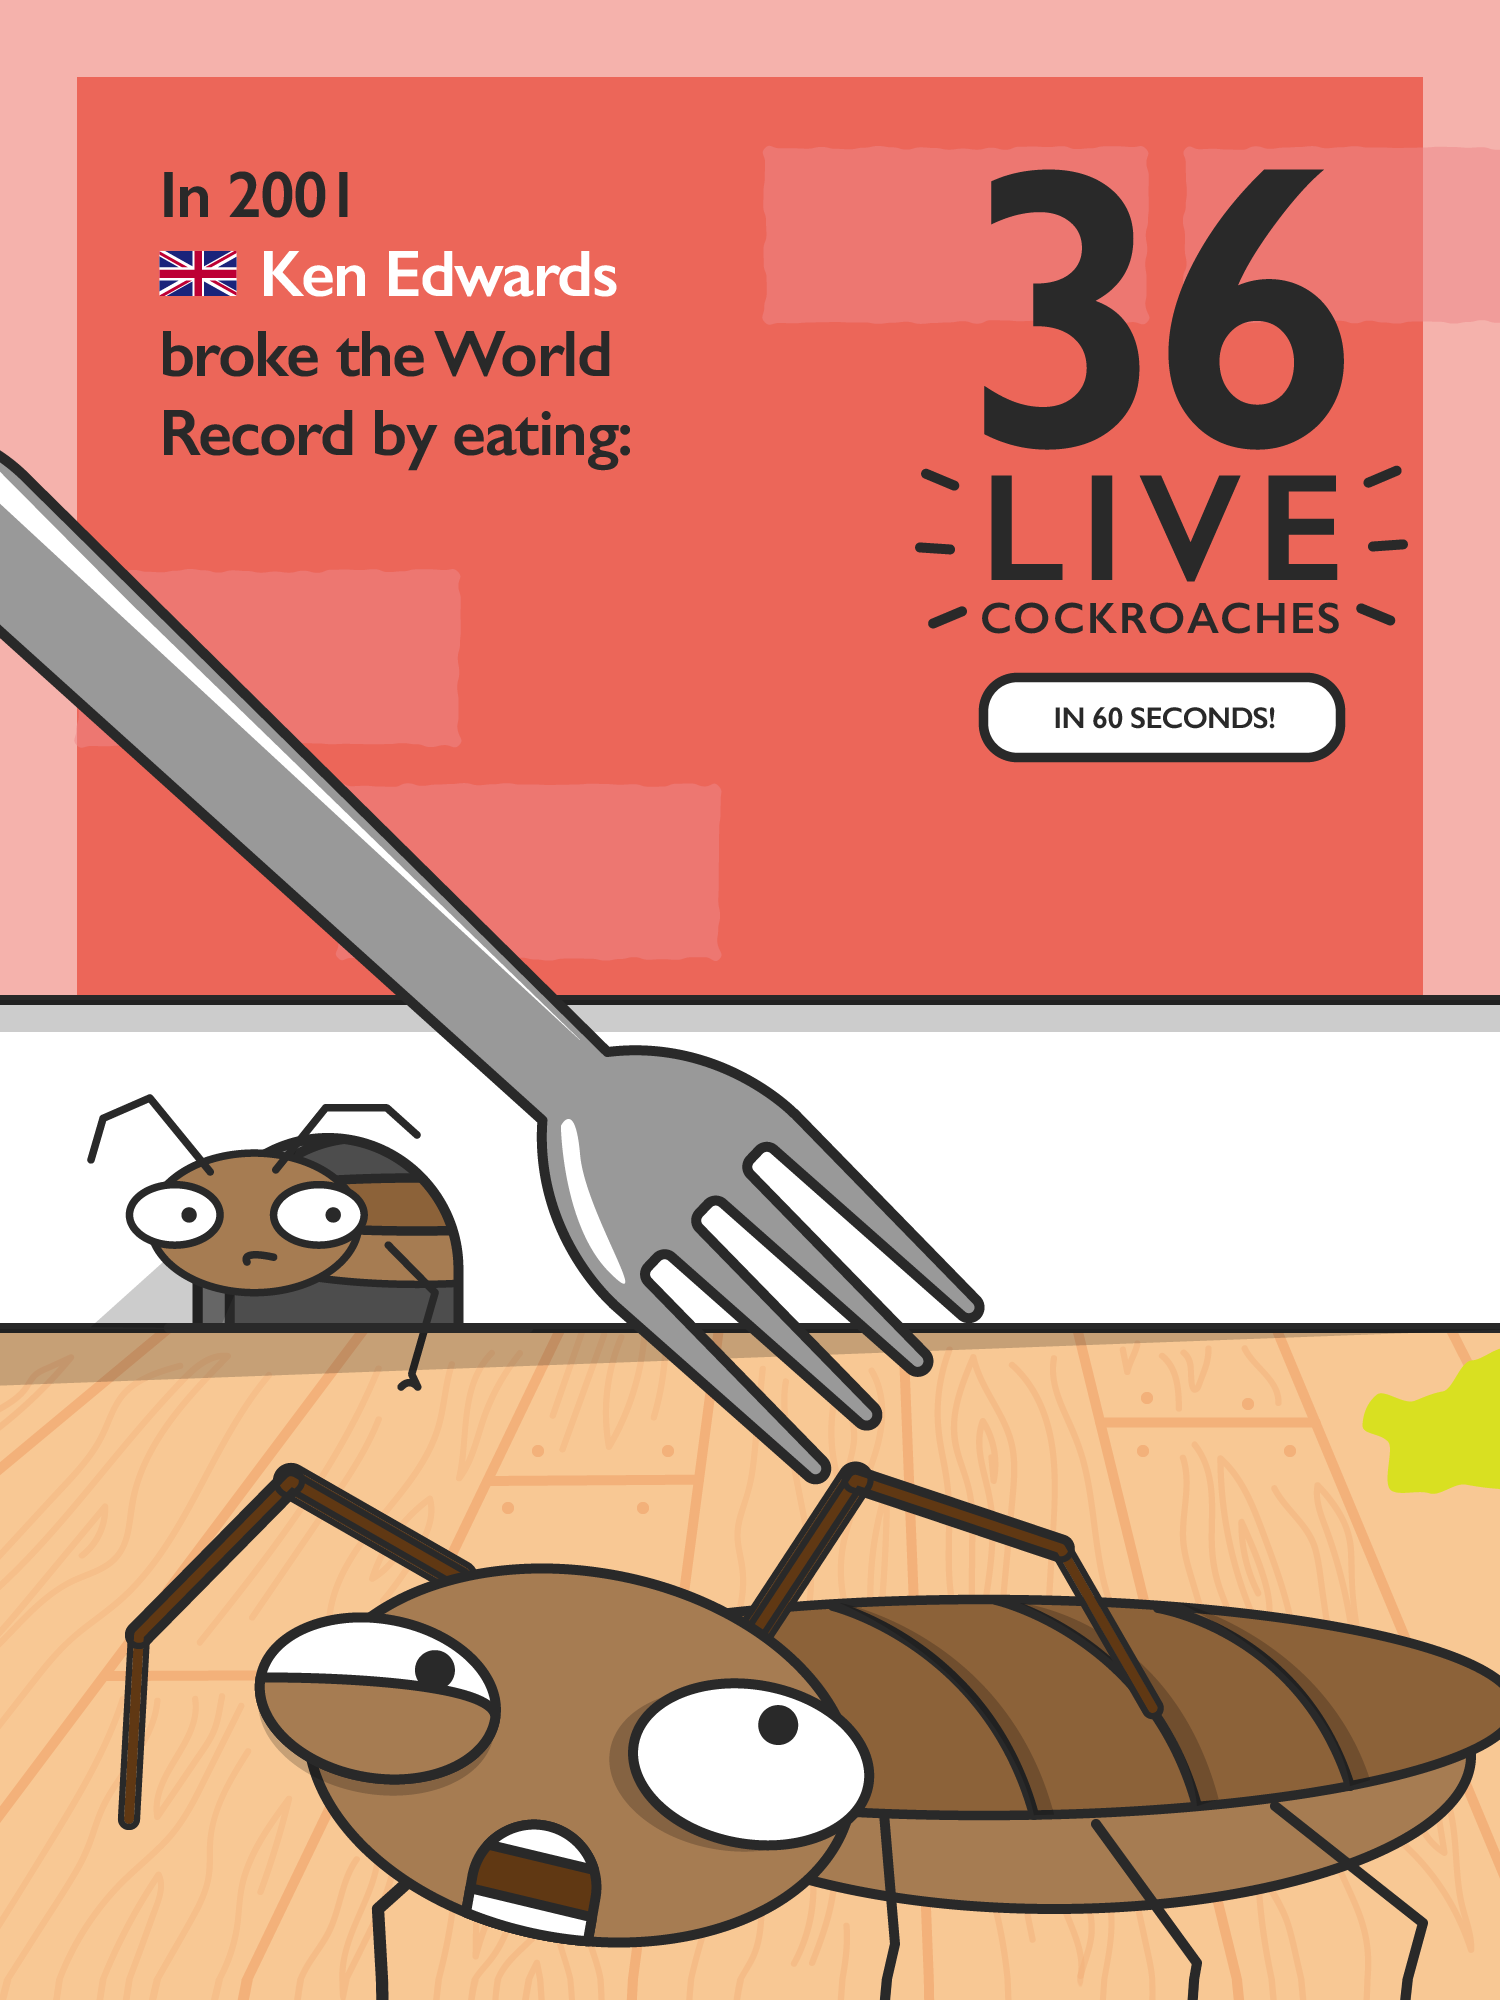 Ken Edwards - 36 Live Cockroaches in 60 Seconds